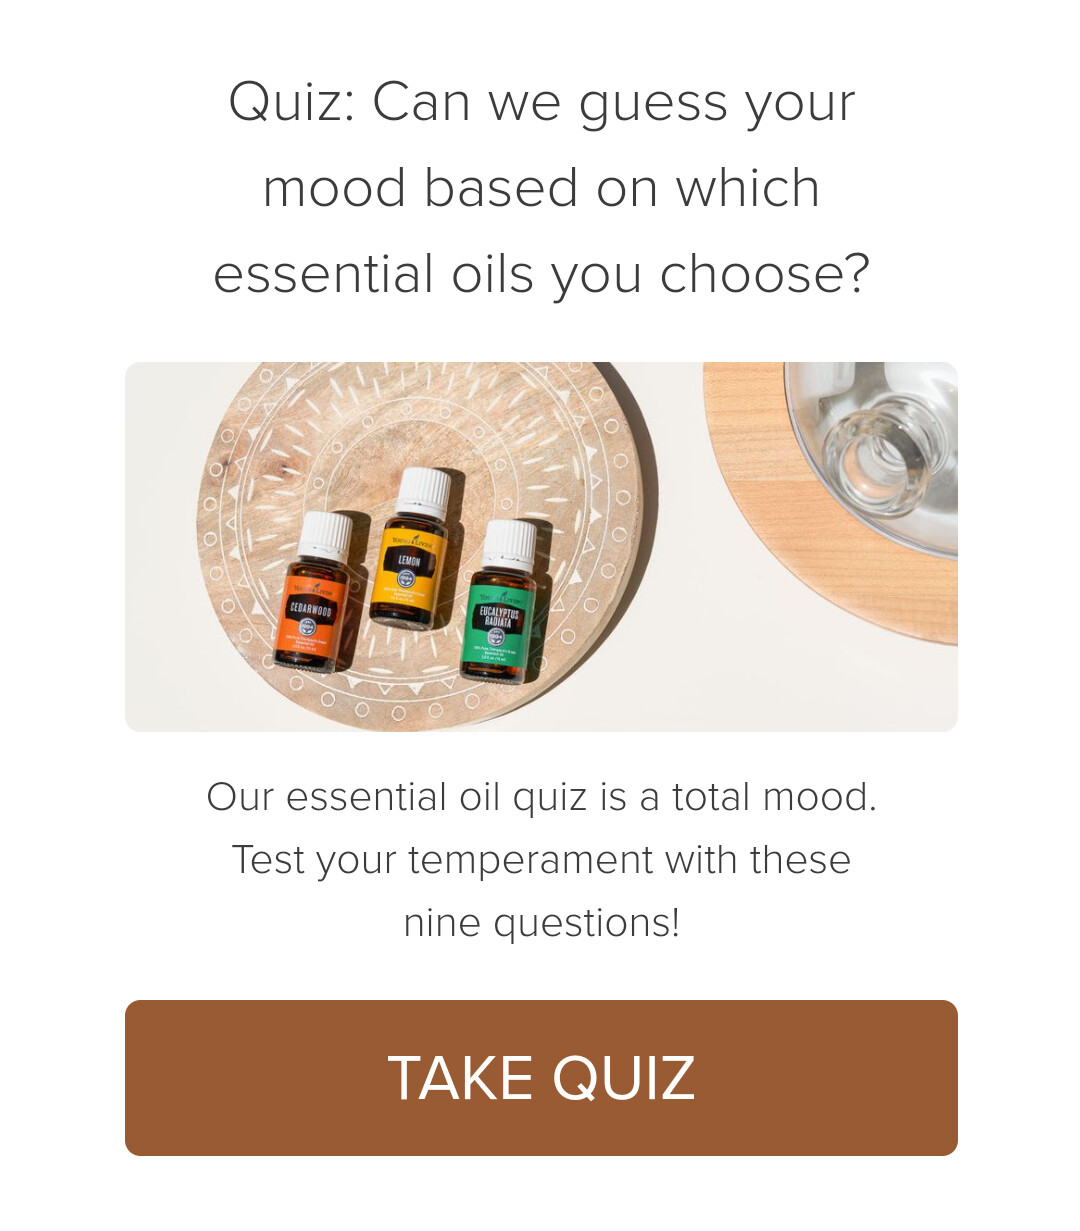 Quiz: Can we guess your mood based on which essential oils you choose?